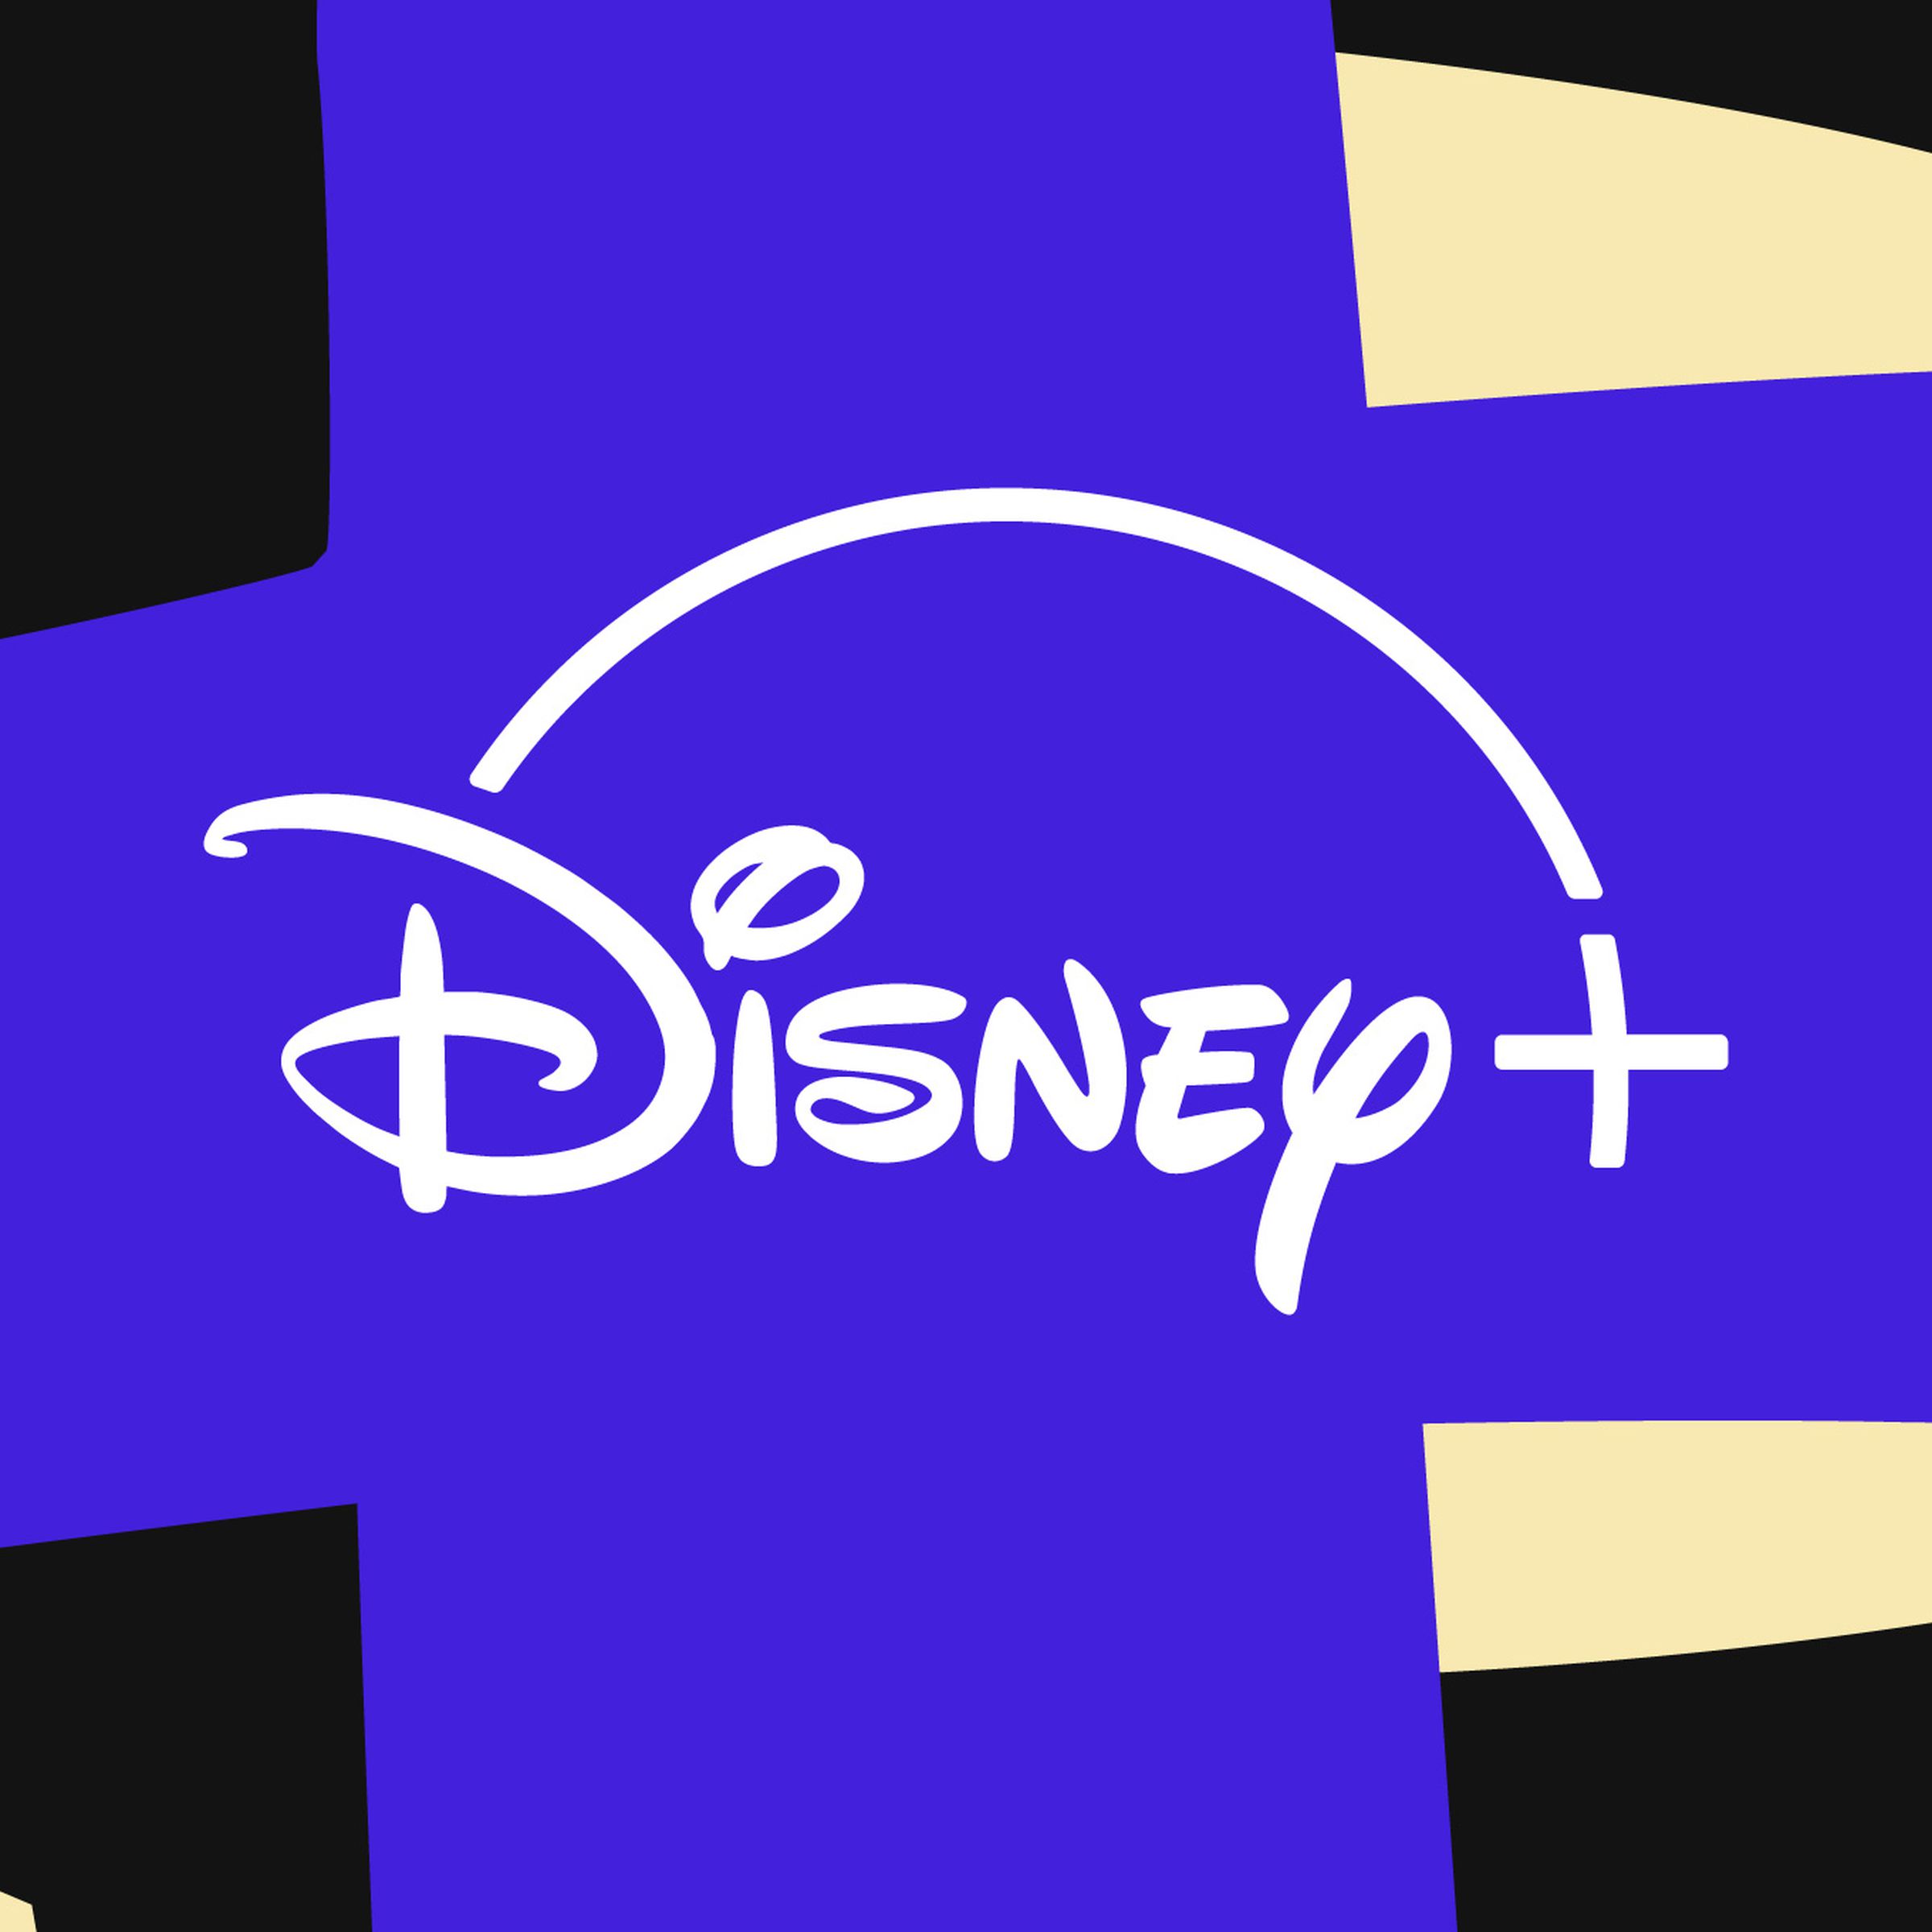 A colorful graphical illustration of the Disney Plus logo.